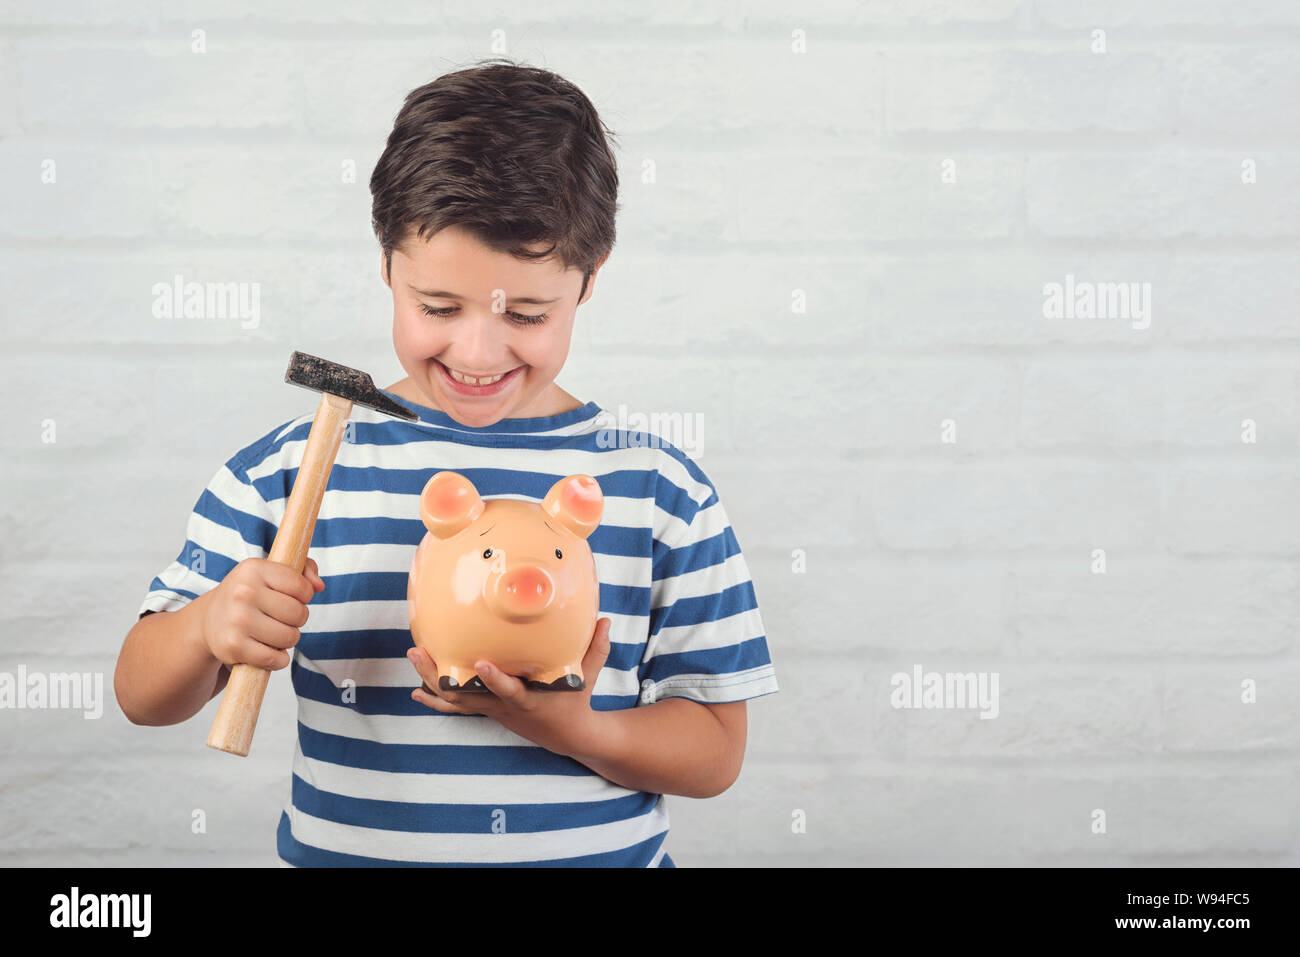 funny child with piggy bank against brick background Stock Photo